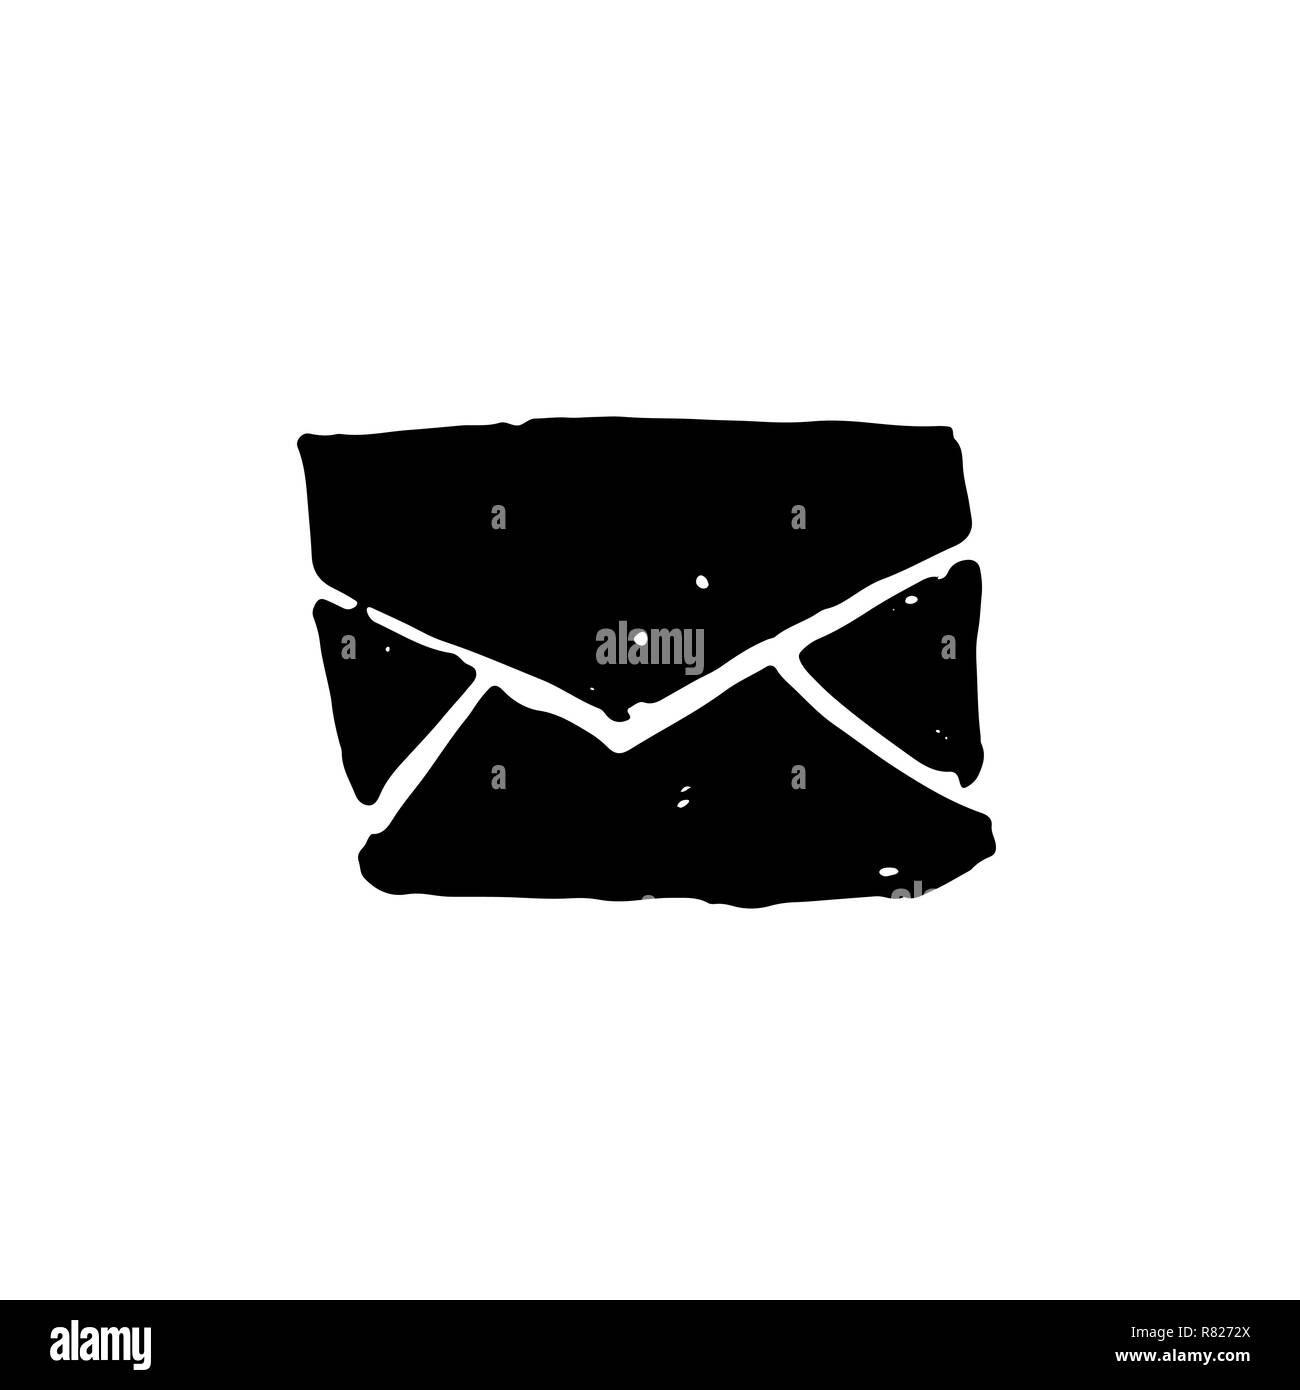 Email grunge icon. Mail dry brush vector illustration. Stock Vector